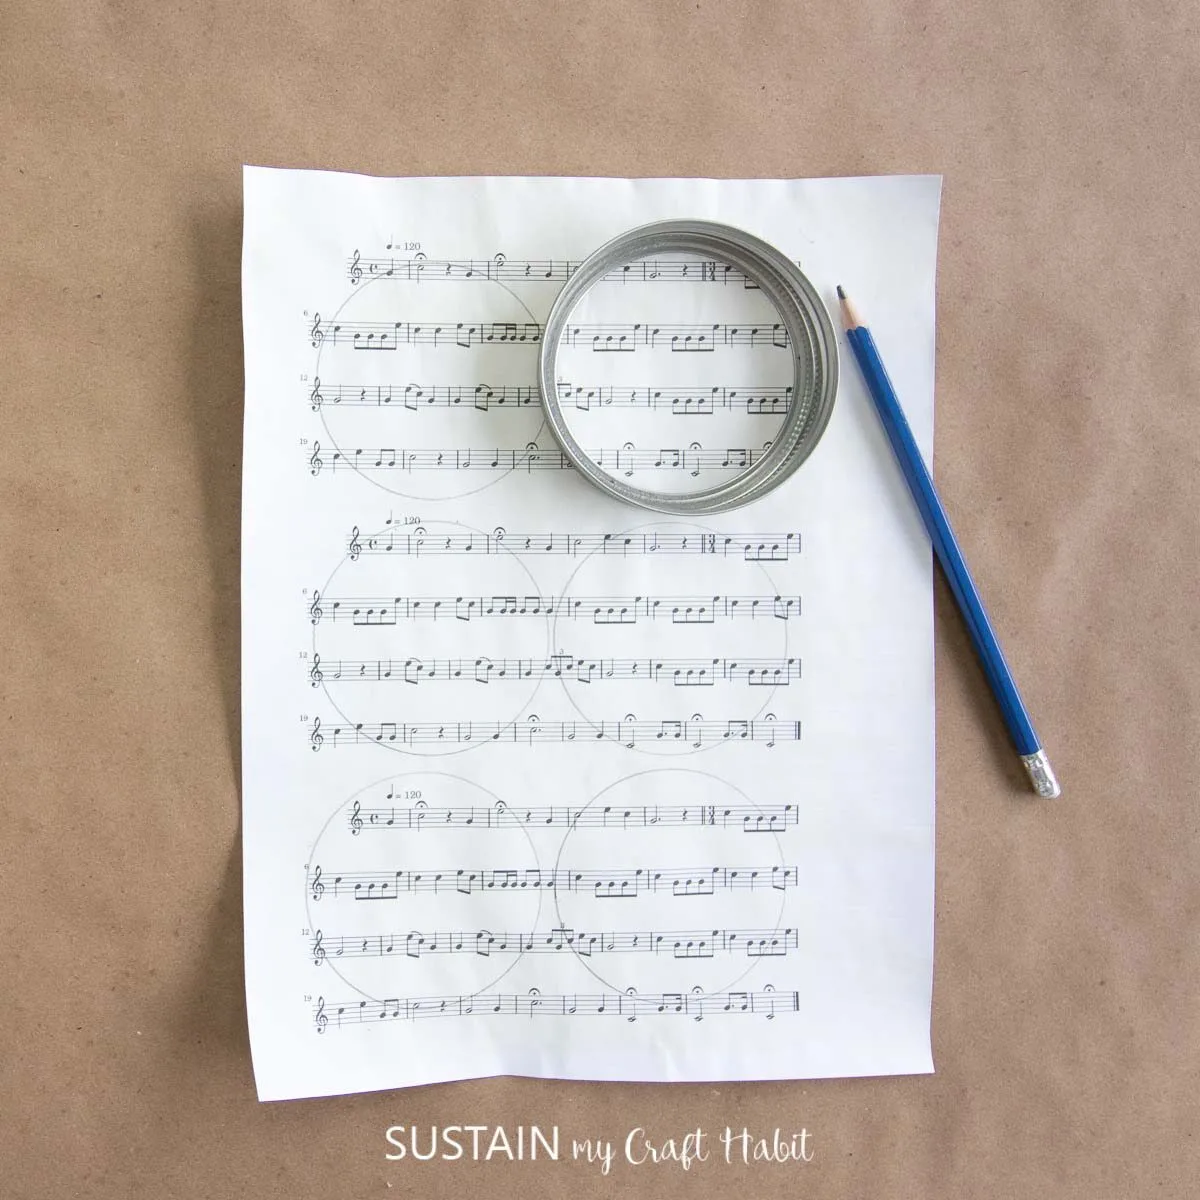 Drawing circles on a music sheet using a canning lid to trace.